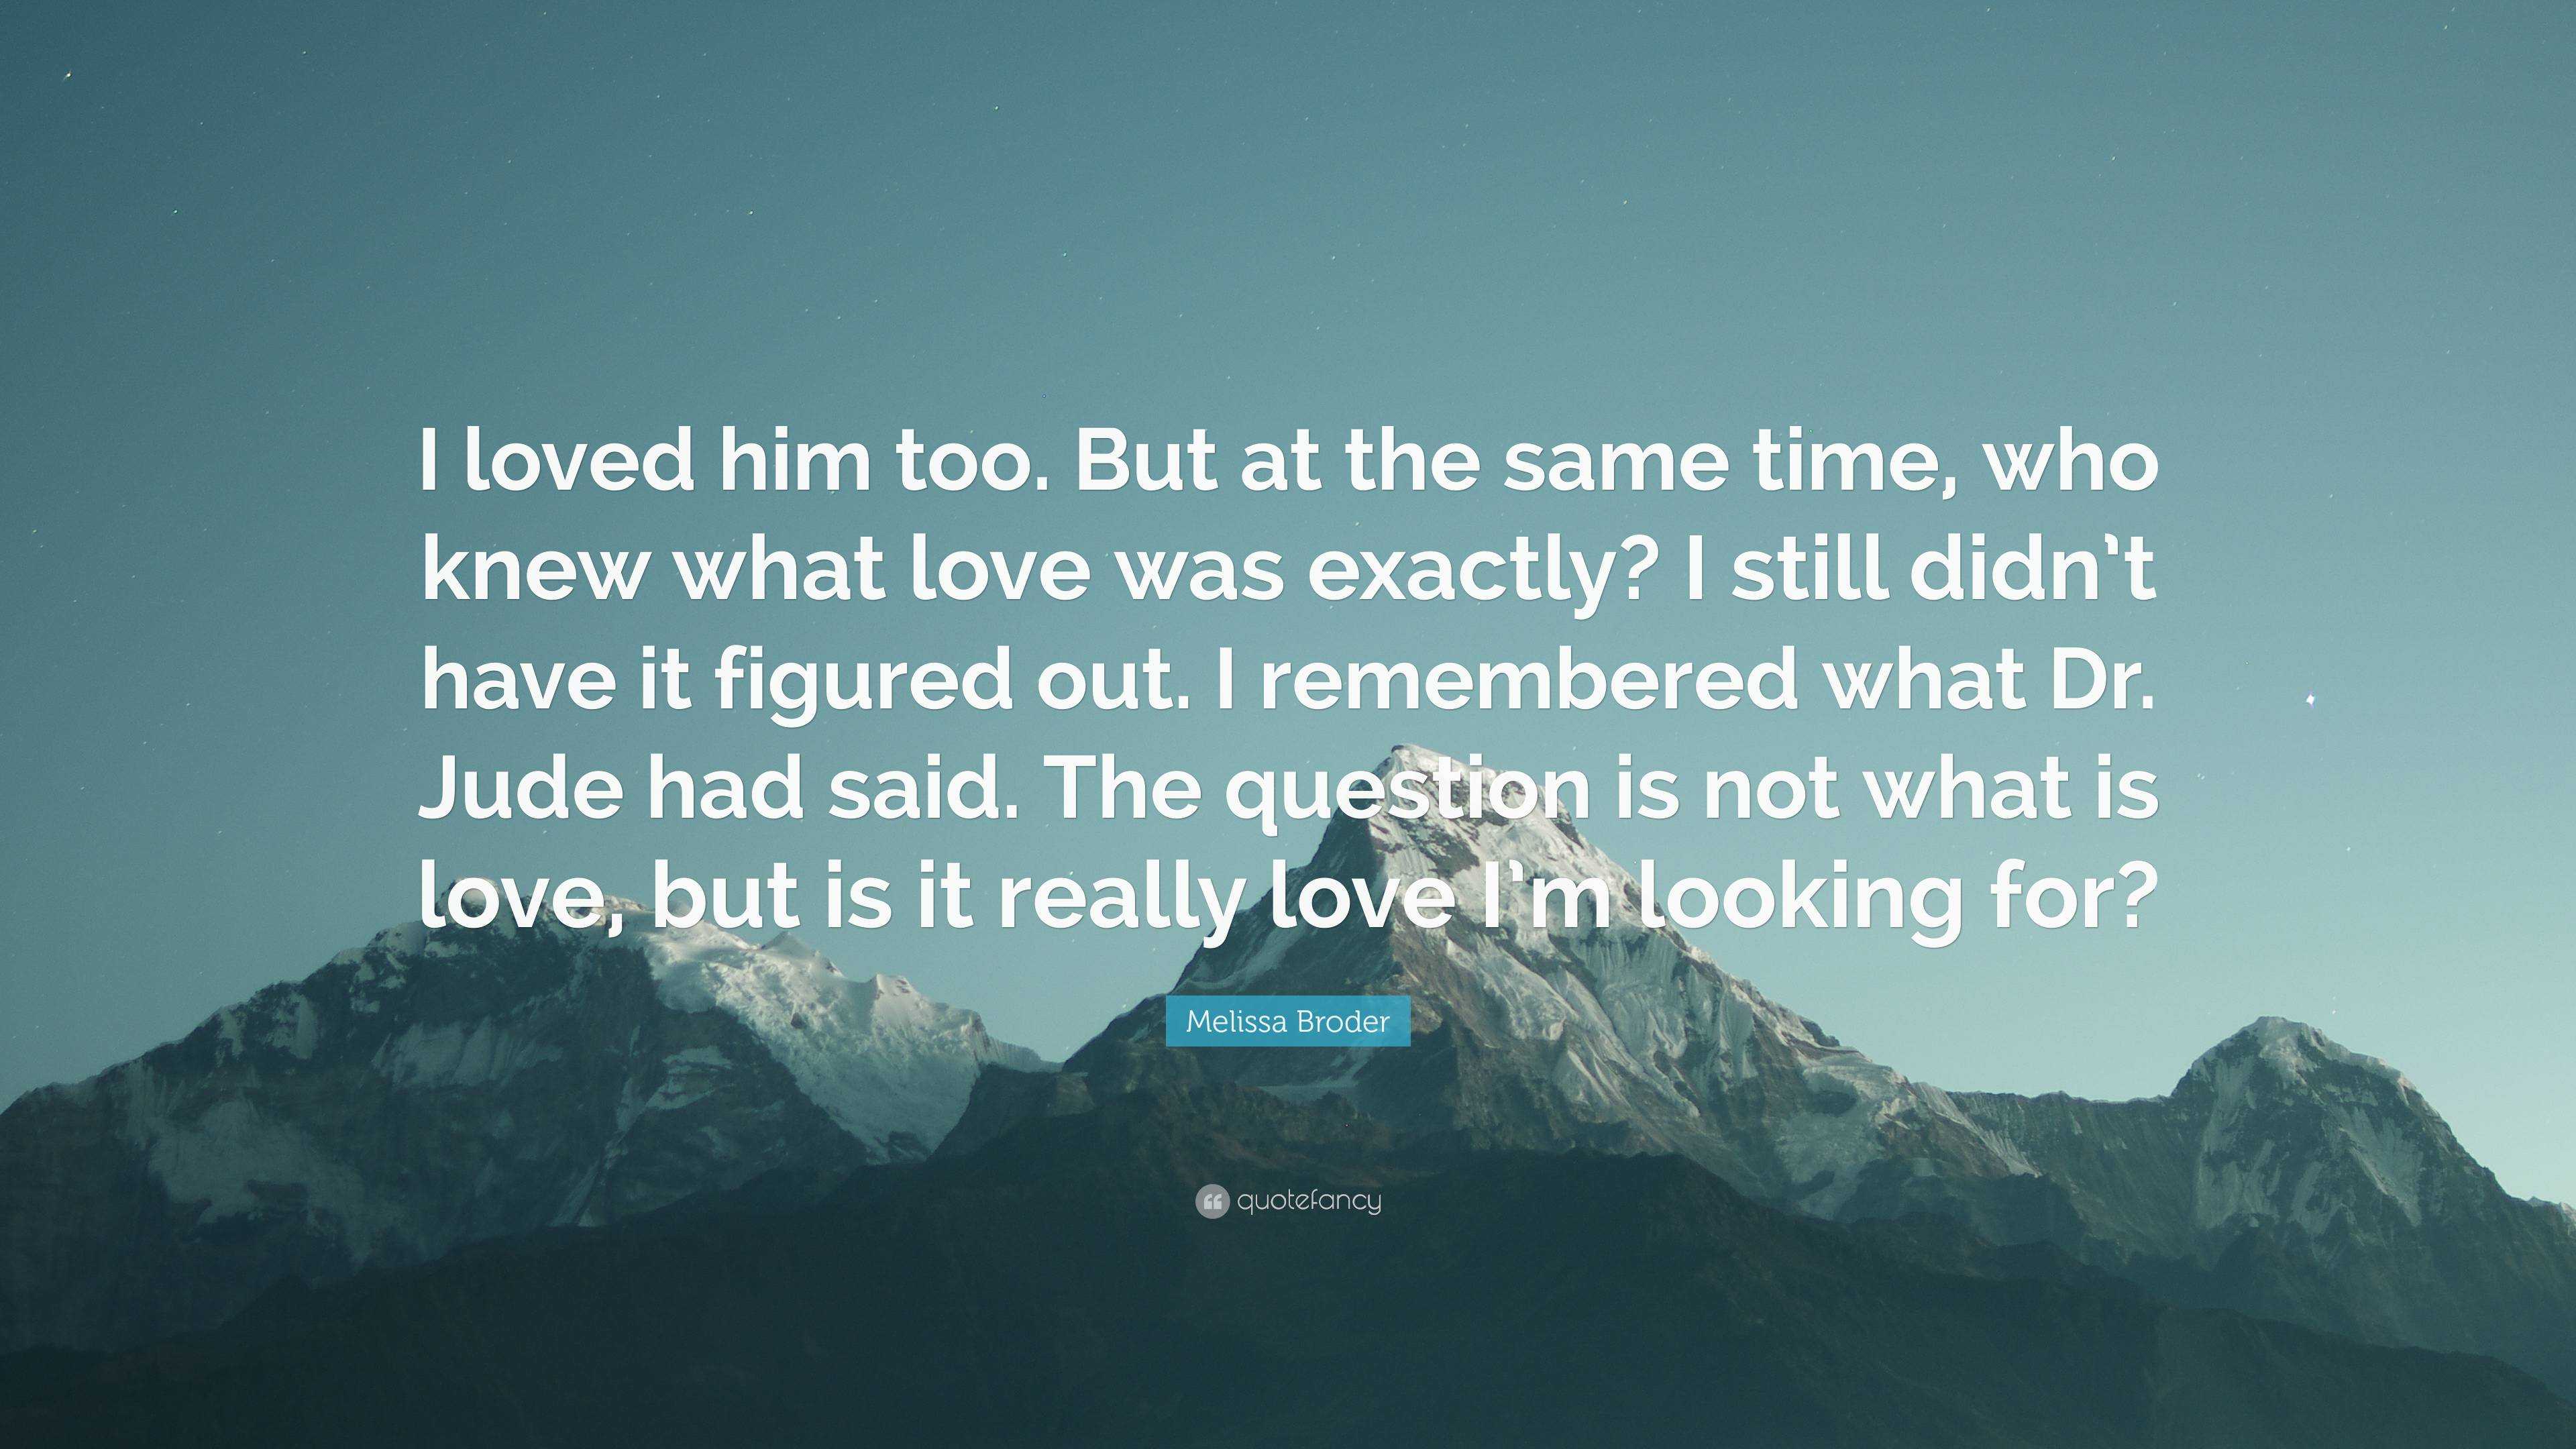 Melissa Broder Quote: “It was as though they loved my naked soul